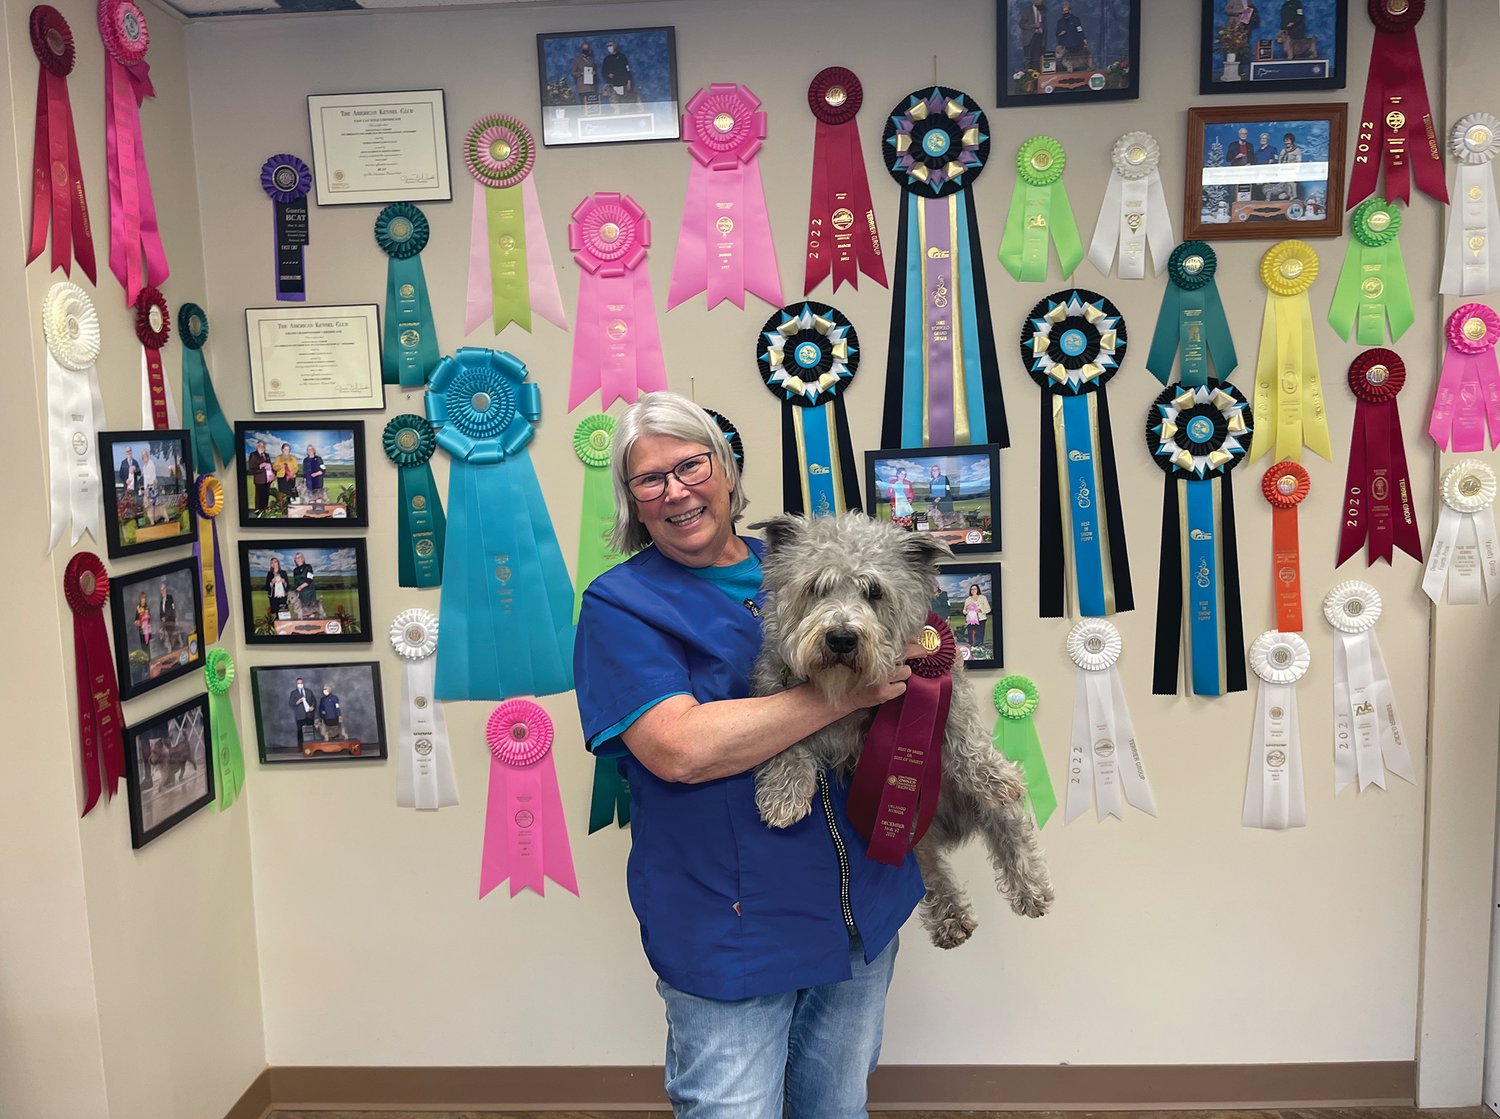 Dawn Jacobson and her dog Guerin pose beside some of the awards they have received in recent years.